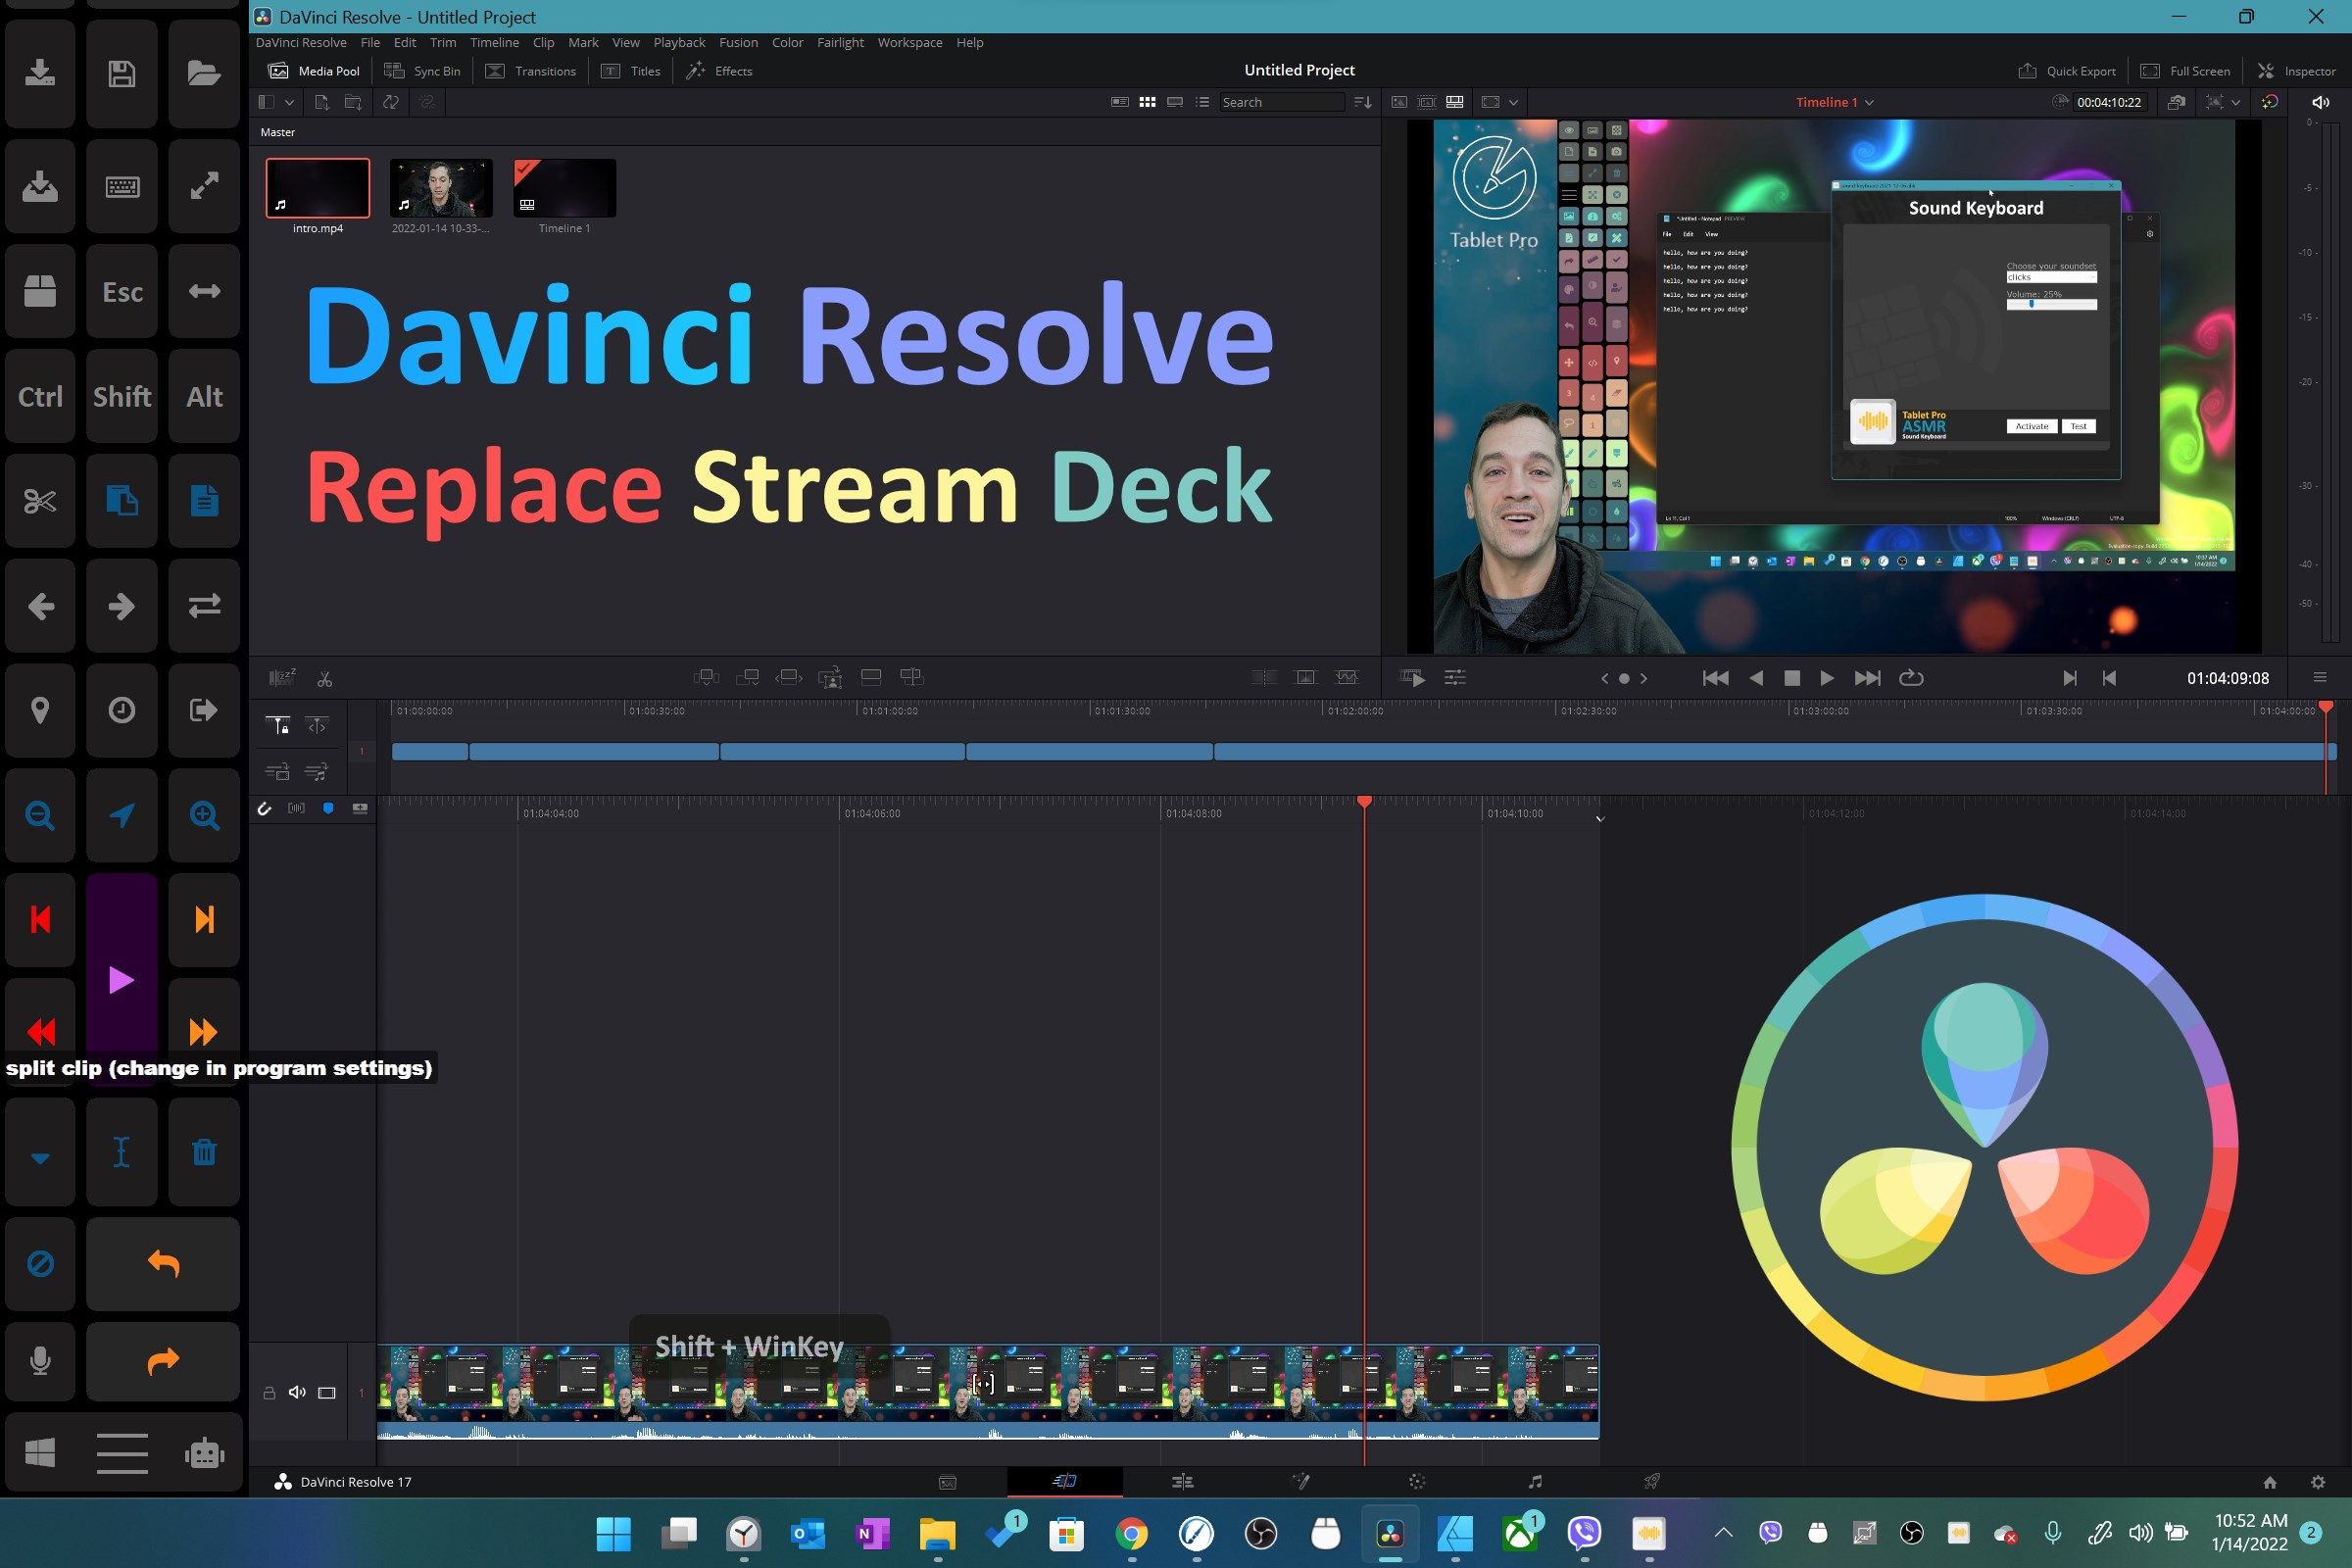 Davinci Resolve is an amazing video editor and is very powerful with the addition of the Stream Deck. The Tablet Pro Artist Pad can be used to replace keyboard shortcuts inside of Resolve and give you impressive and effective controls to edit video on your couch with a Windows tablet and stylus.